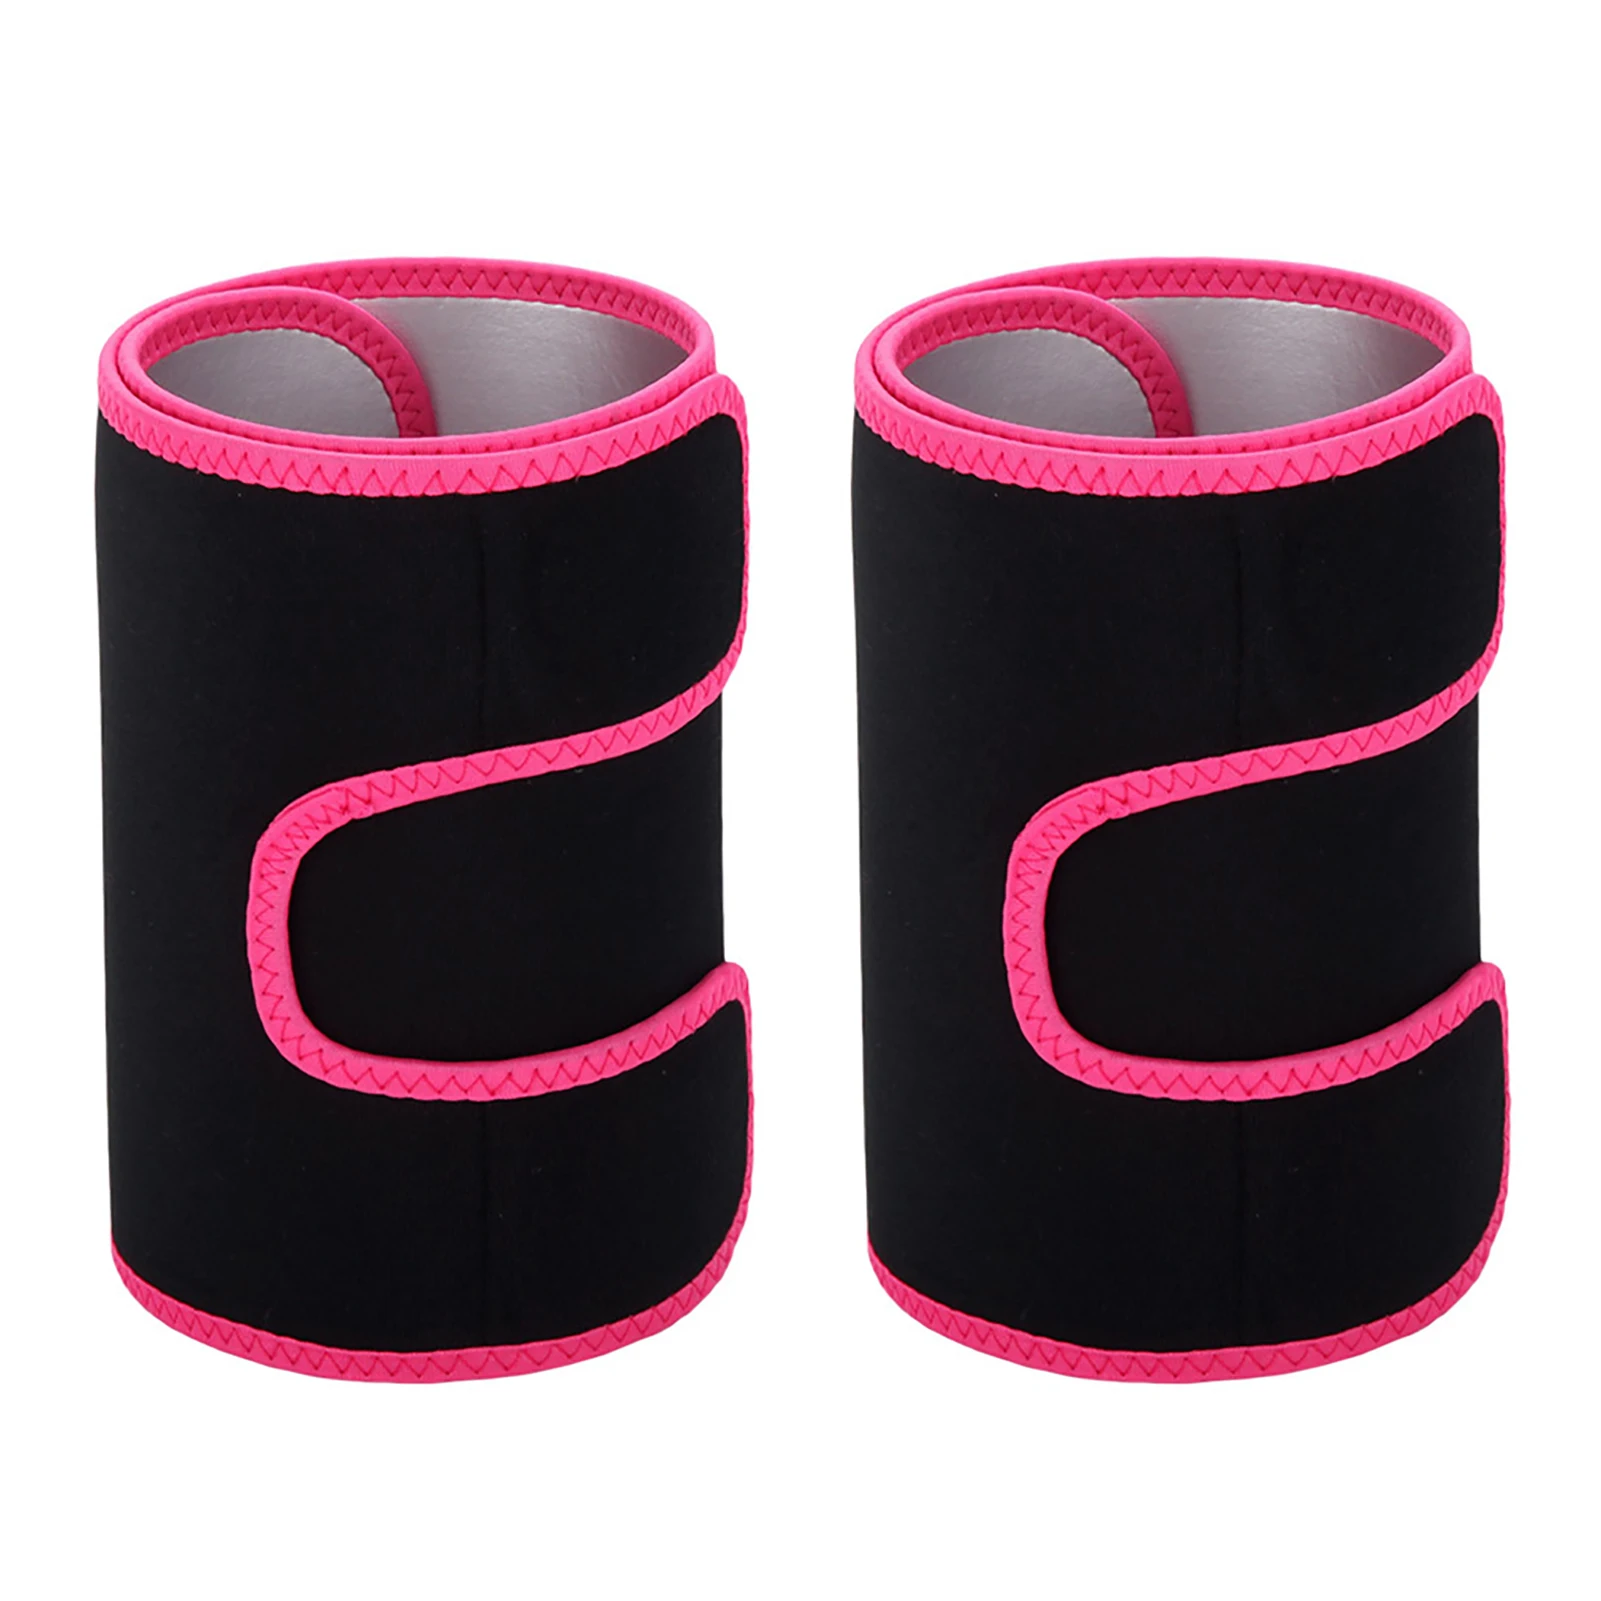 

1pair Neoprene Sports Fat Burning Legs Shaper Weight Loss Sweat Thigh Trimmer Support Stretchy Running Slimmer Wrap Lifter Soft